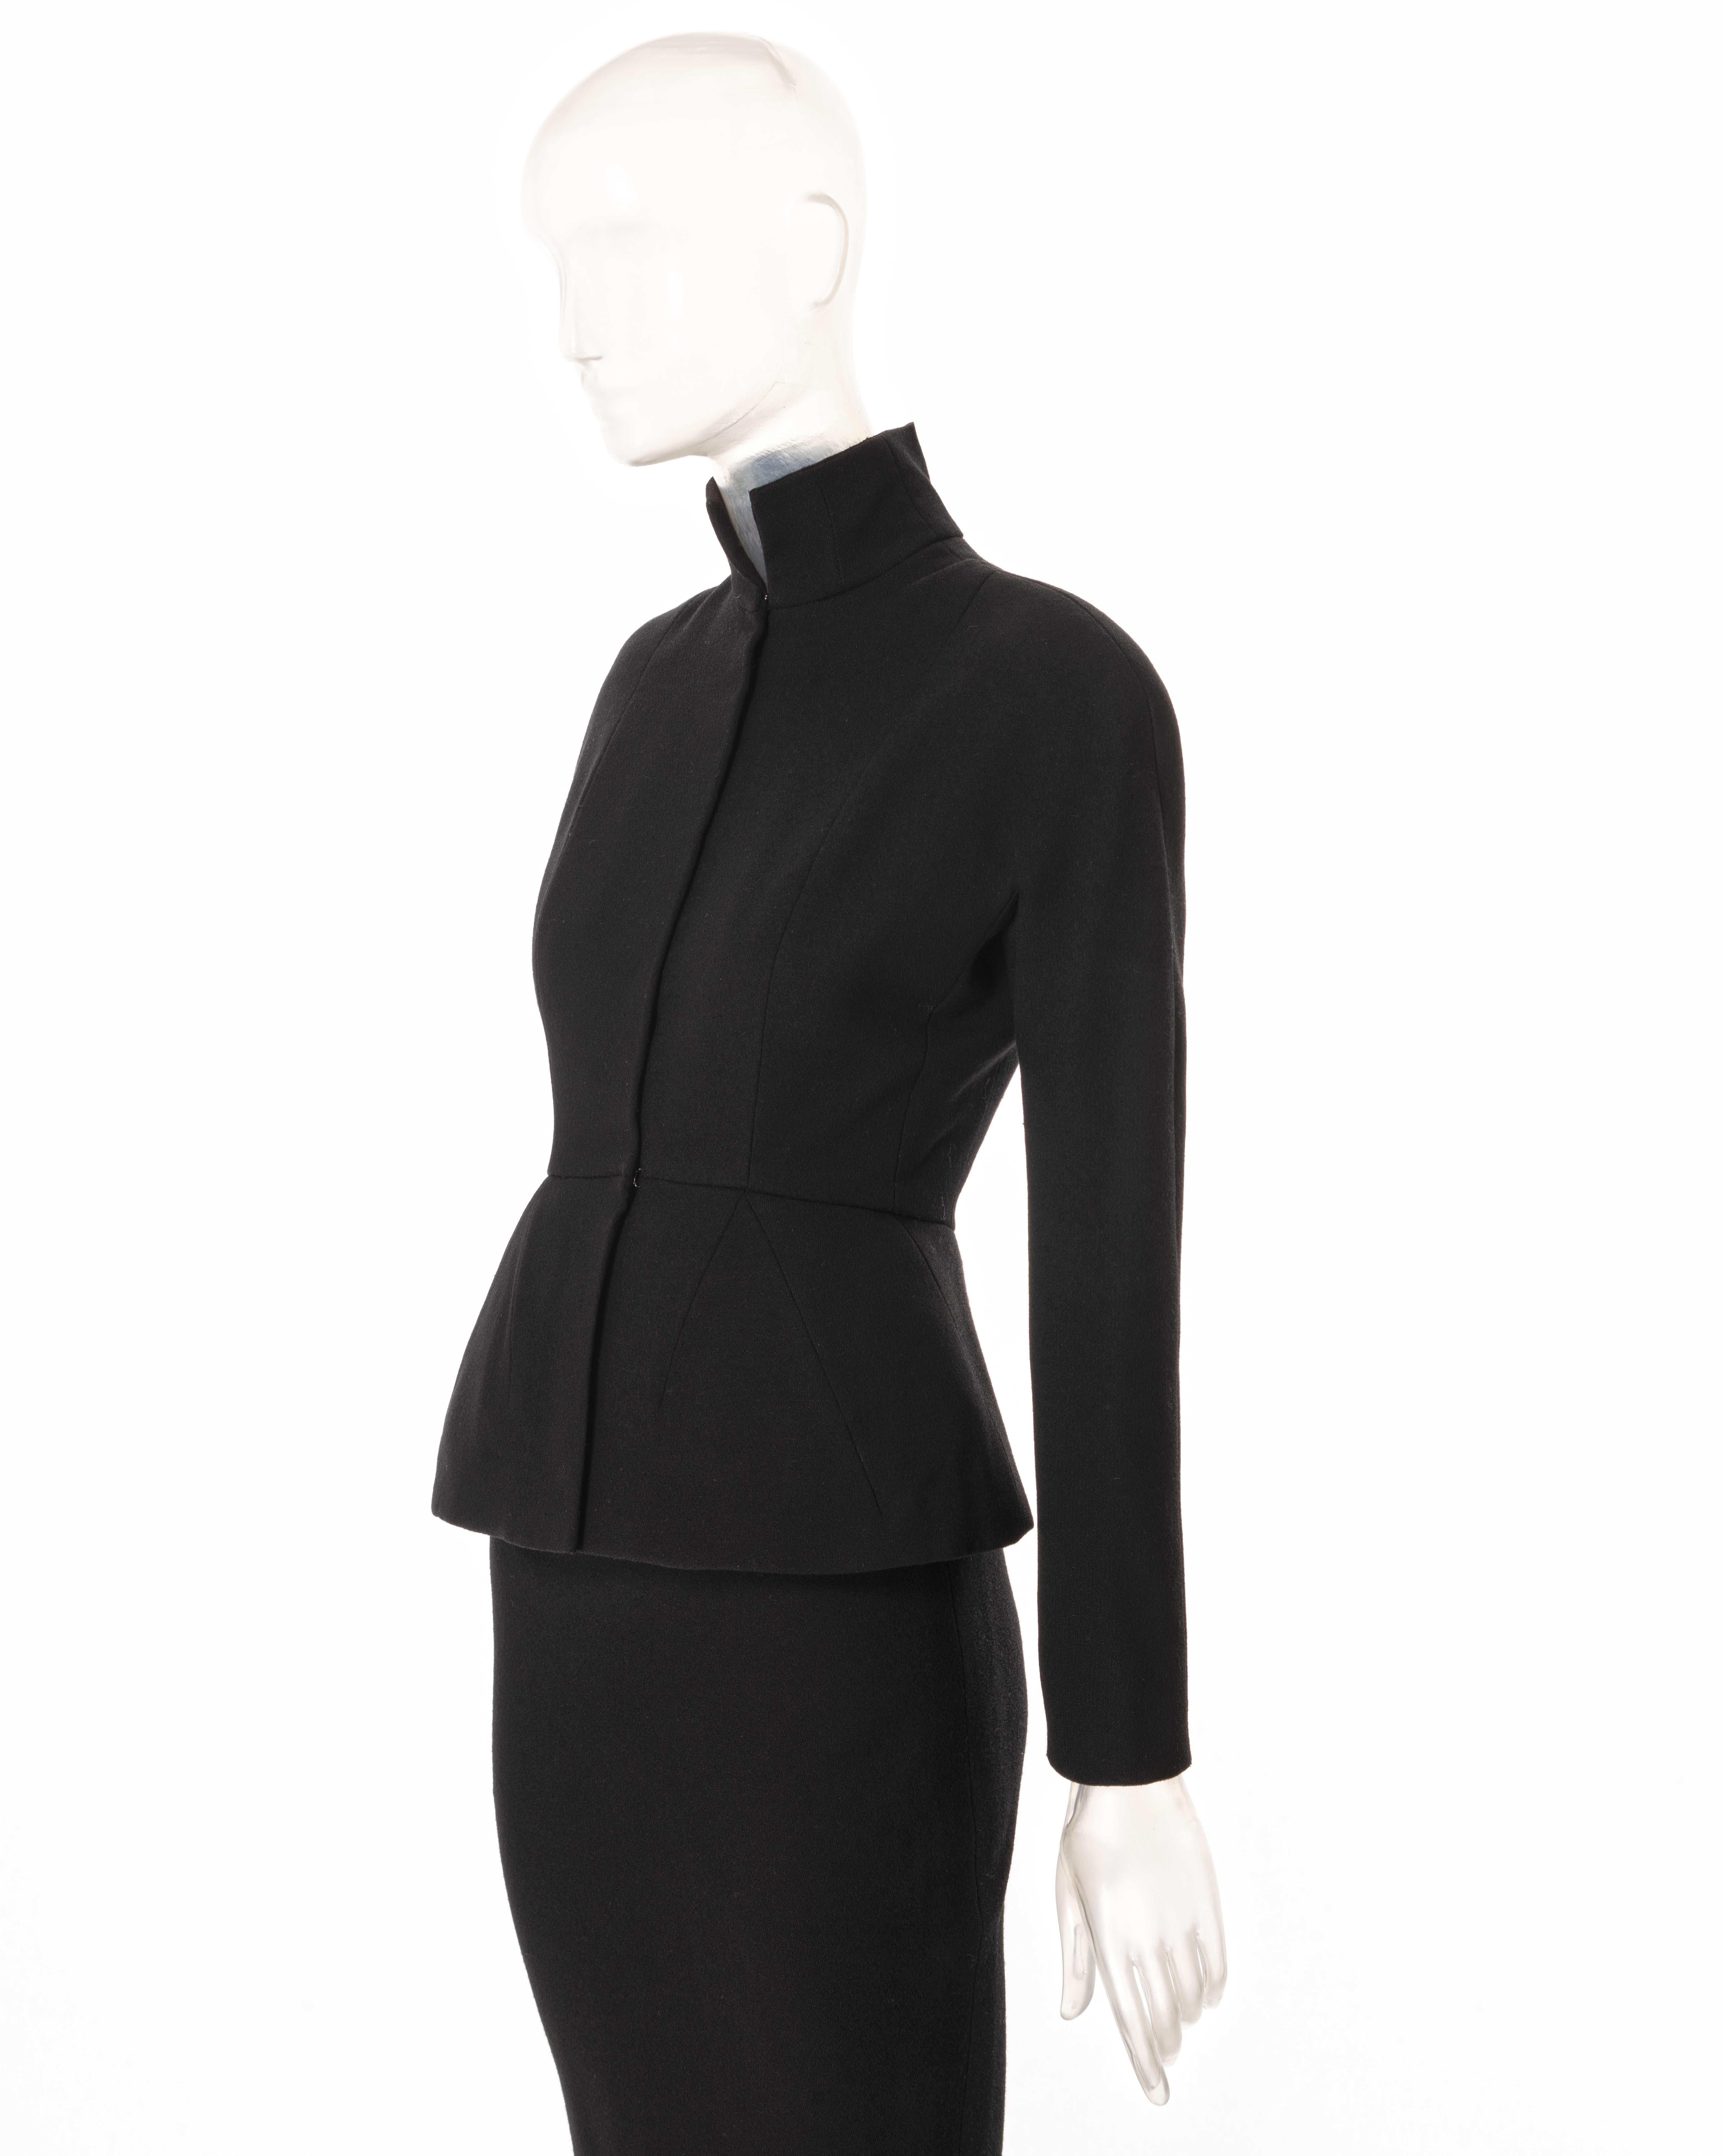 Christian Dior by John Galliano black wool crepe haute-couture bar suit, fw 1998 For Sale 7